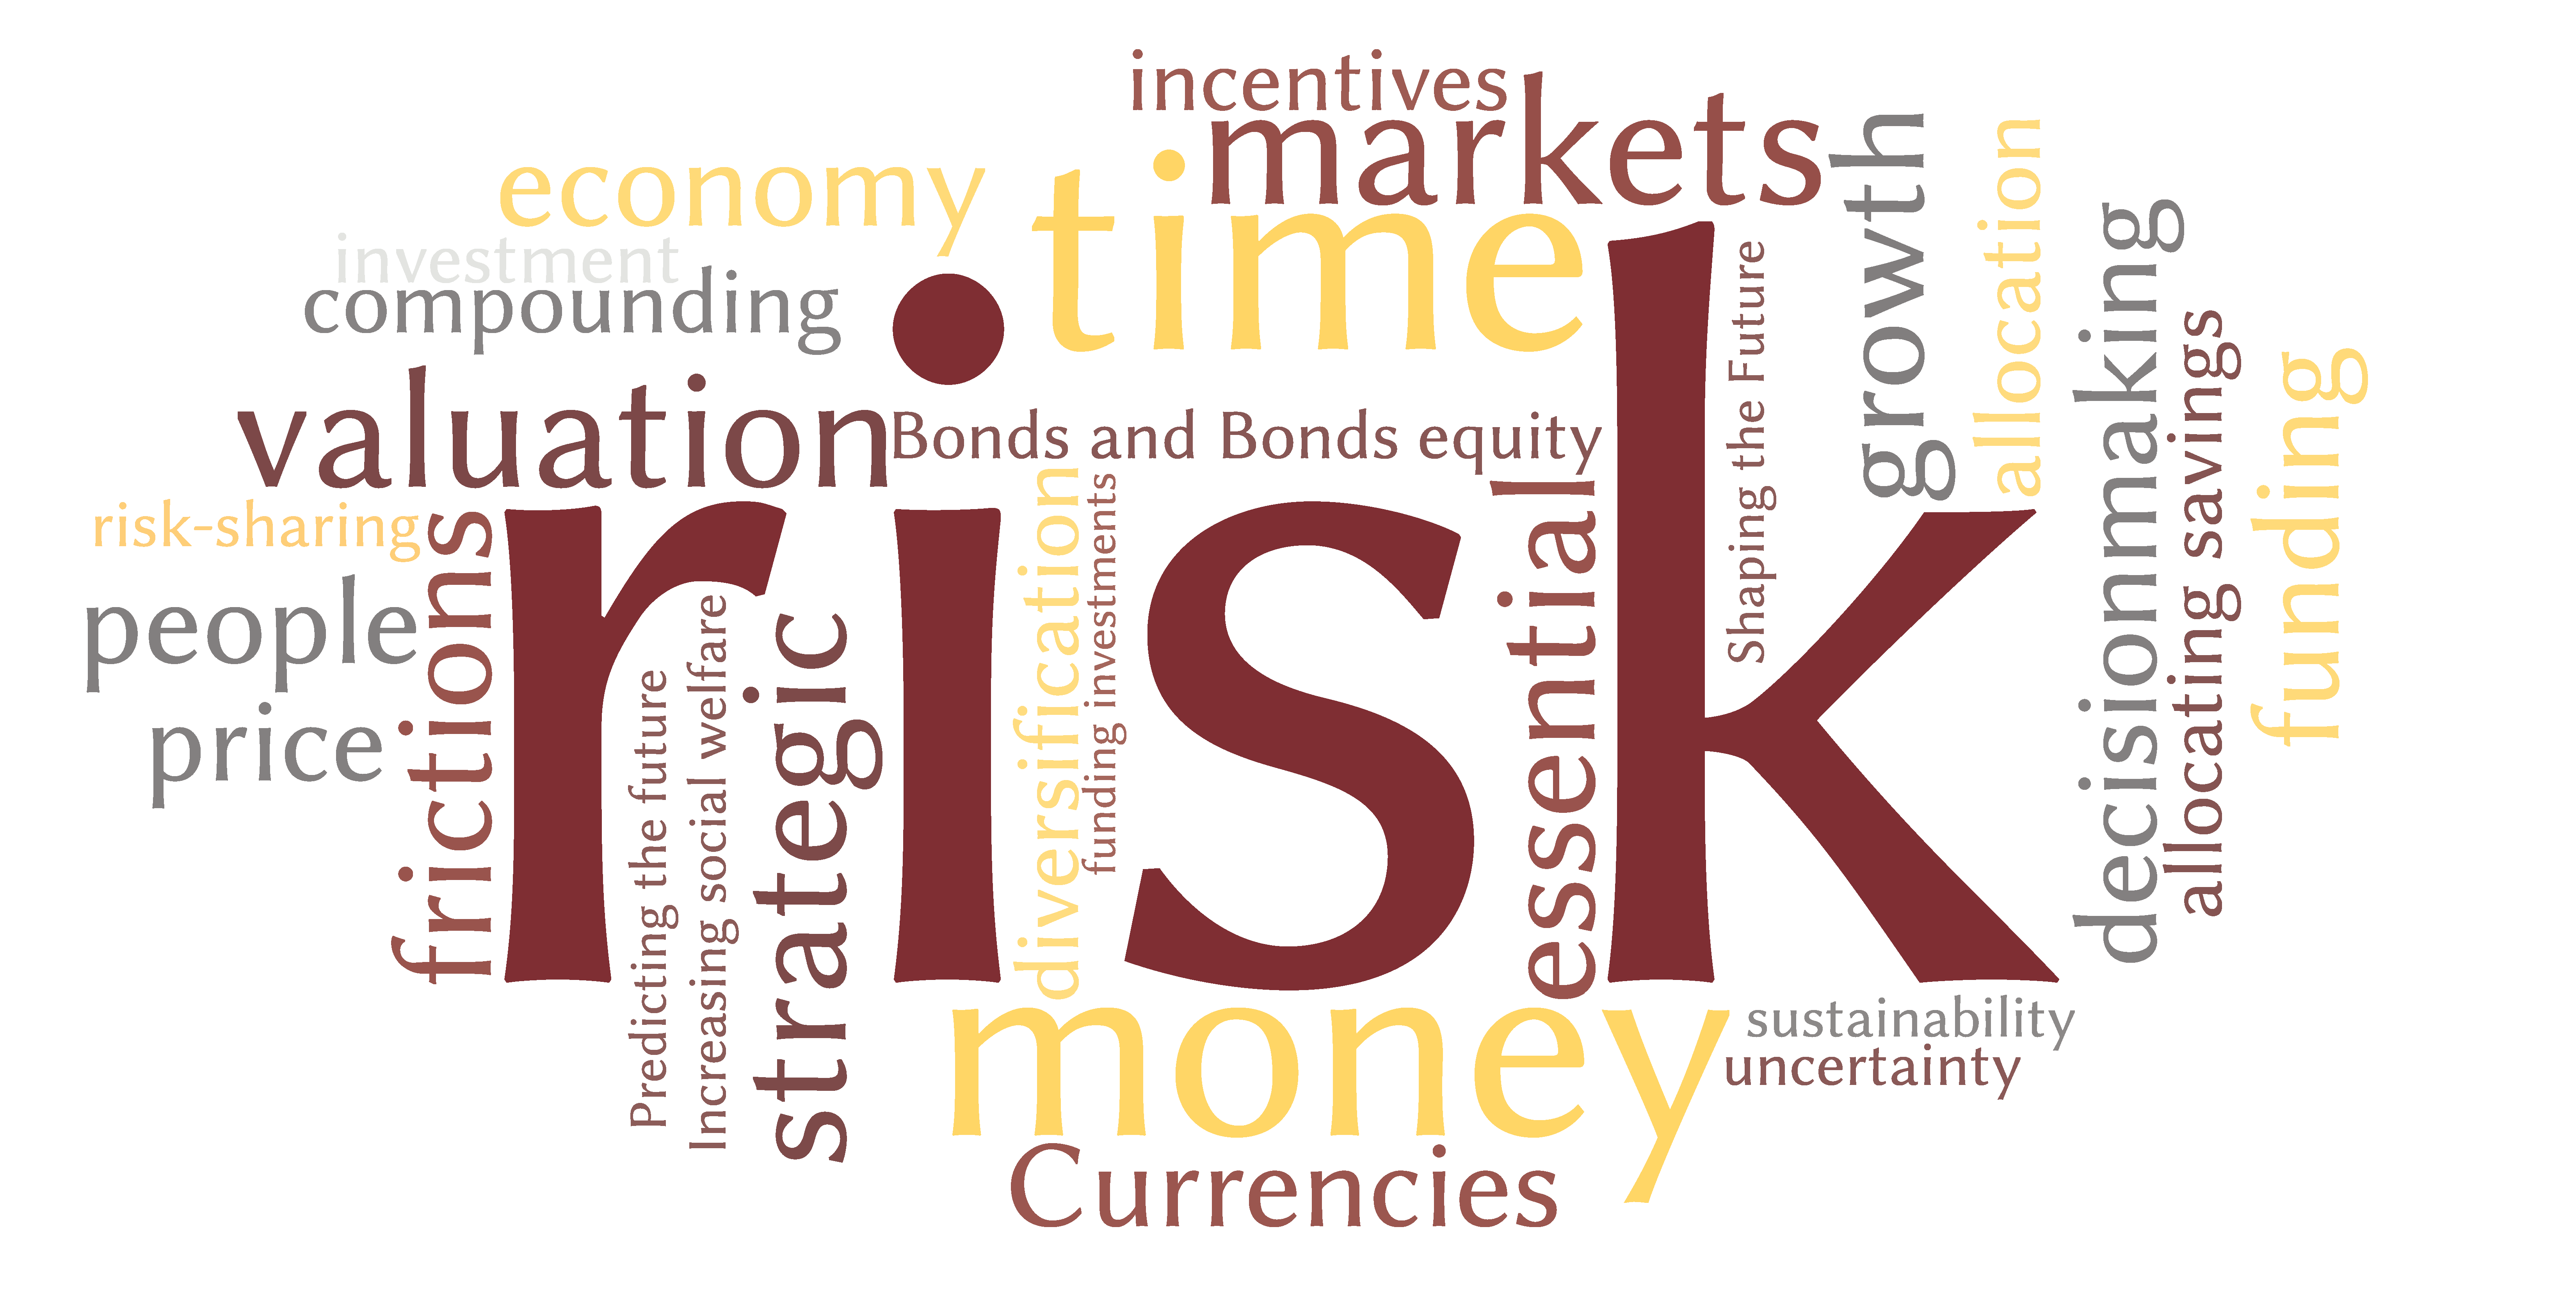 A word cloud of words that came to mind when our finance faculty were asked what came to mind in association with finance. Risk, money, and time were the most popular.